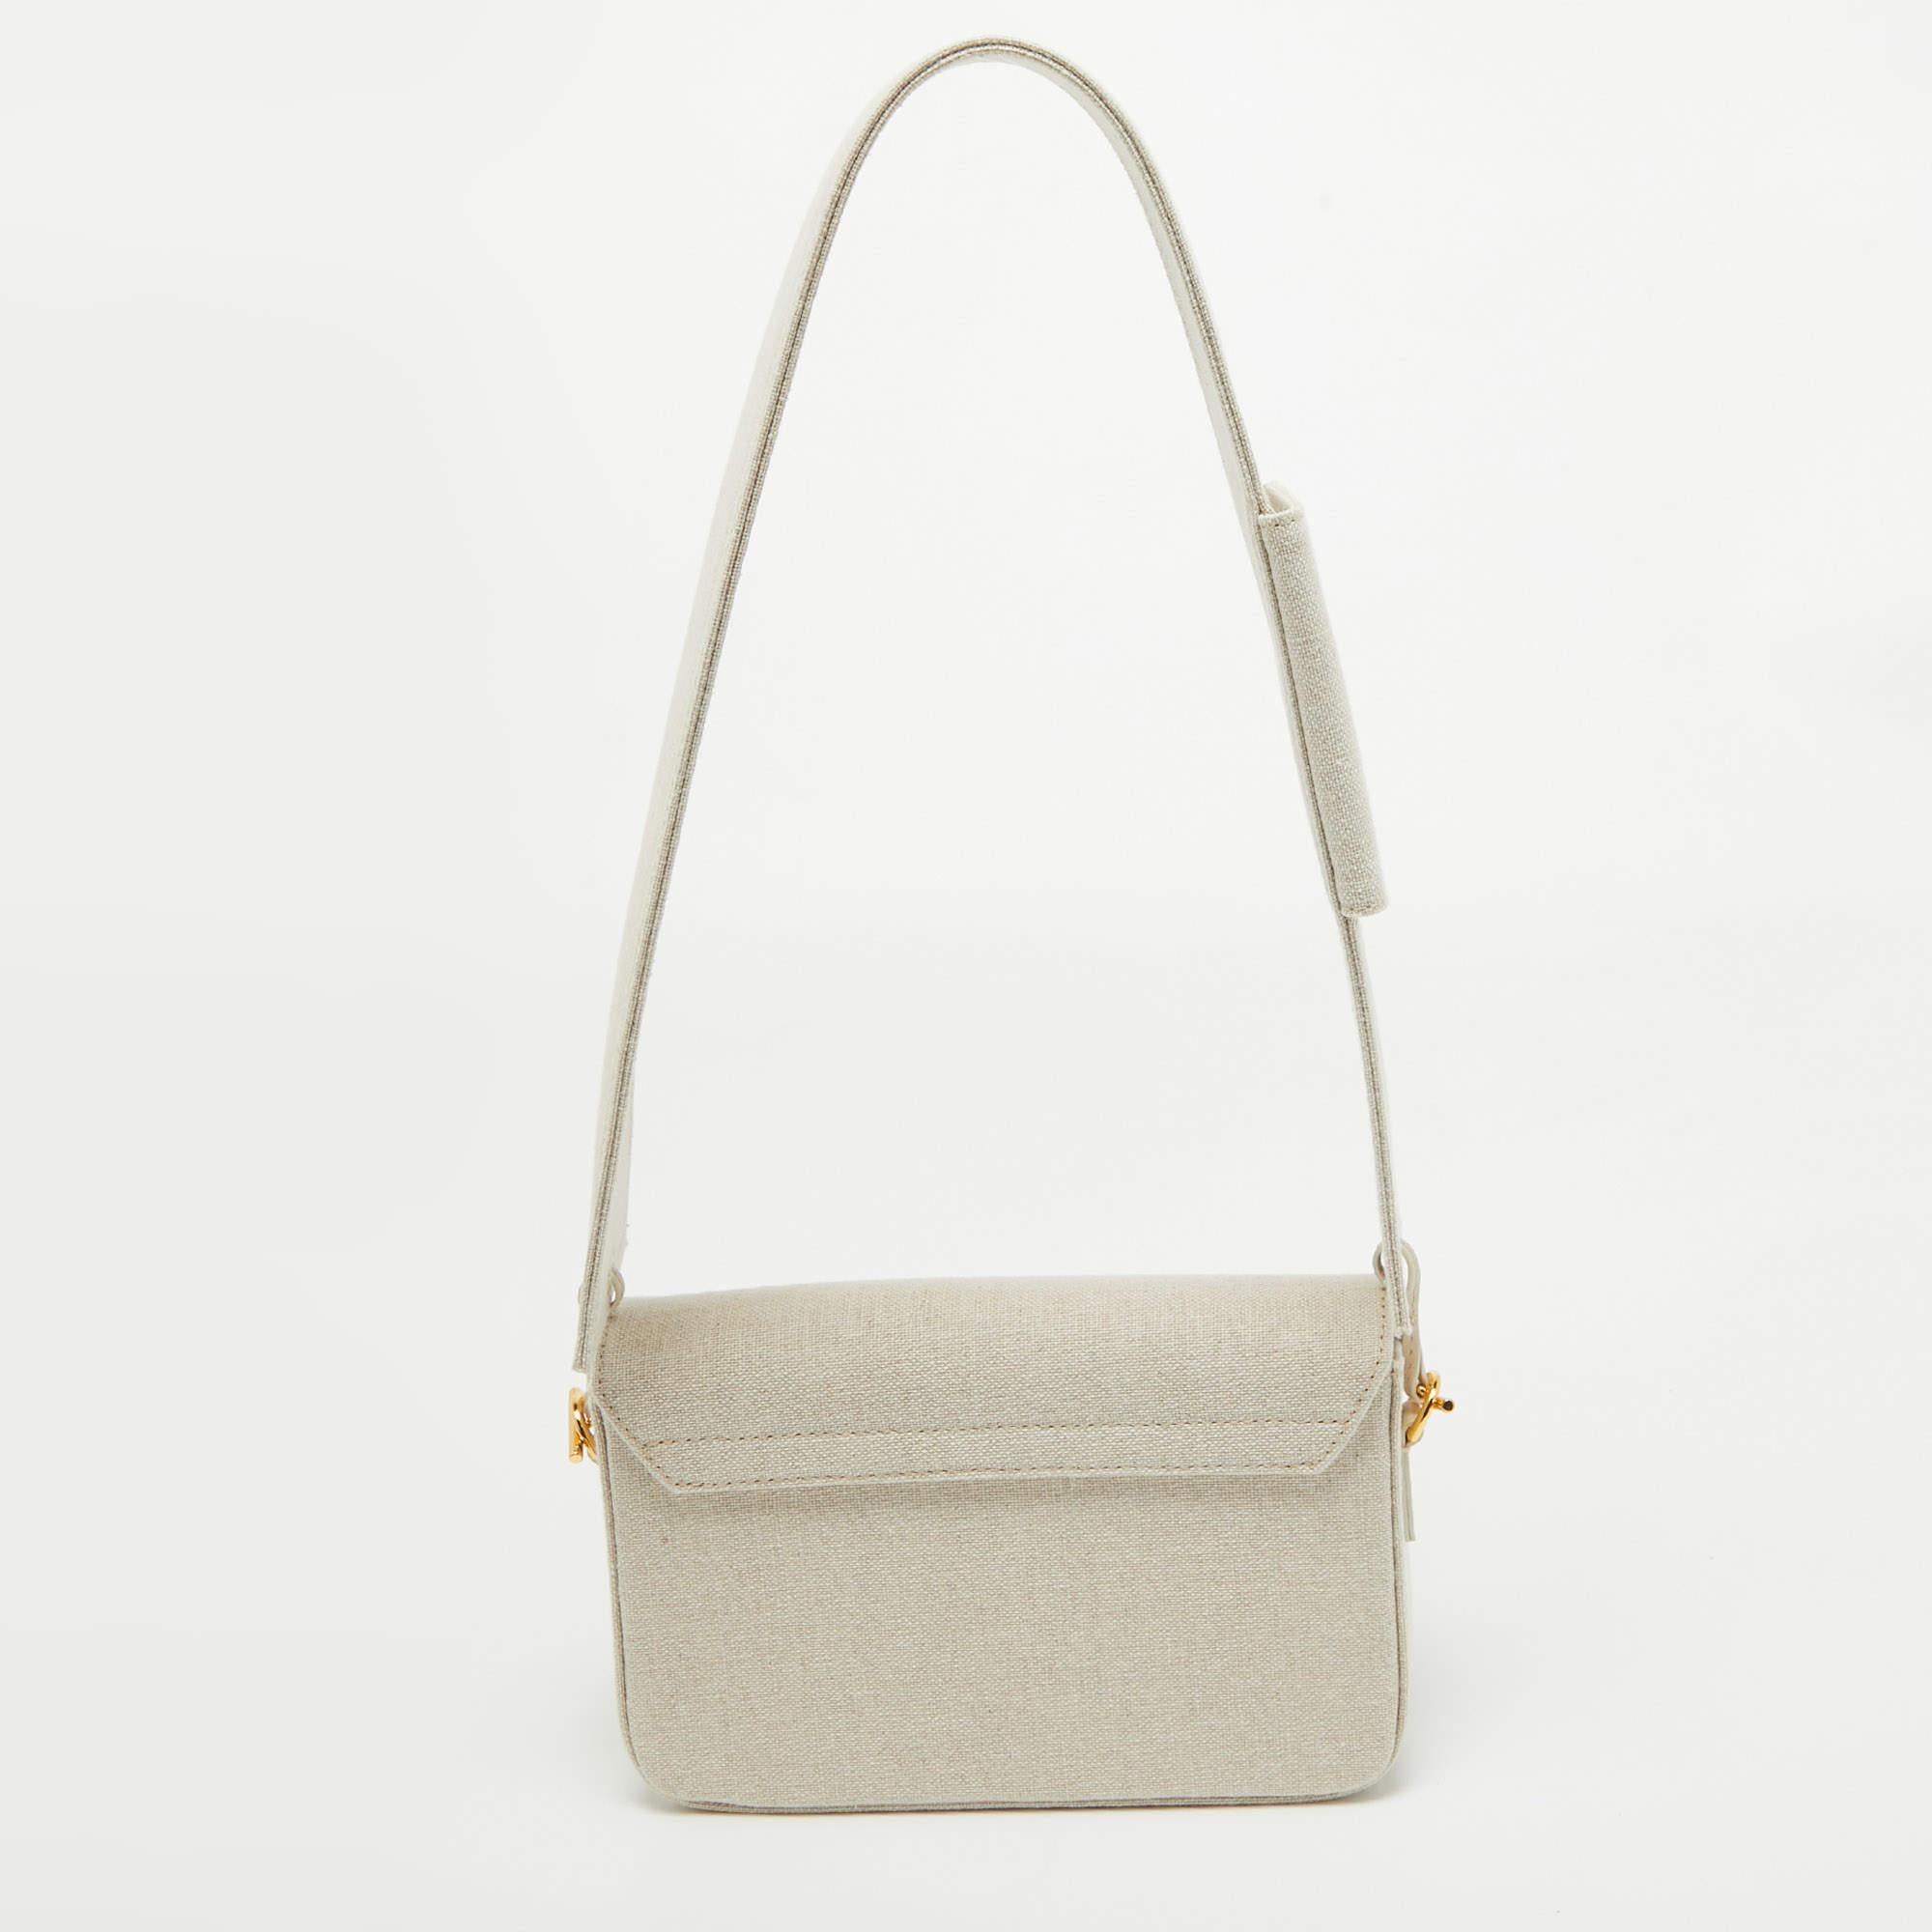 The Jacquemus Le Carinu shoulder bag is a chic and versatile accessory that exudes effortless sophistication. Crafted from premium canvas, it features the iconic Jacquemus logo subtly embossed on its surface. With a sleek silhouette and adjustable